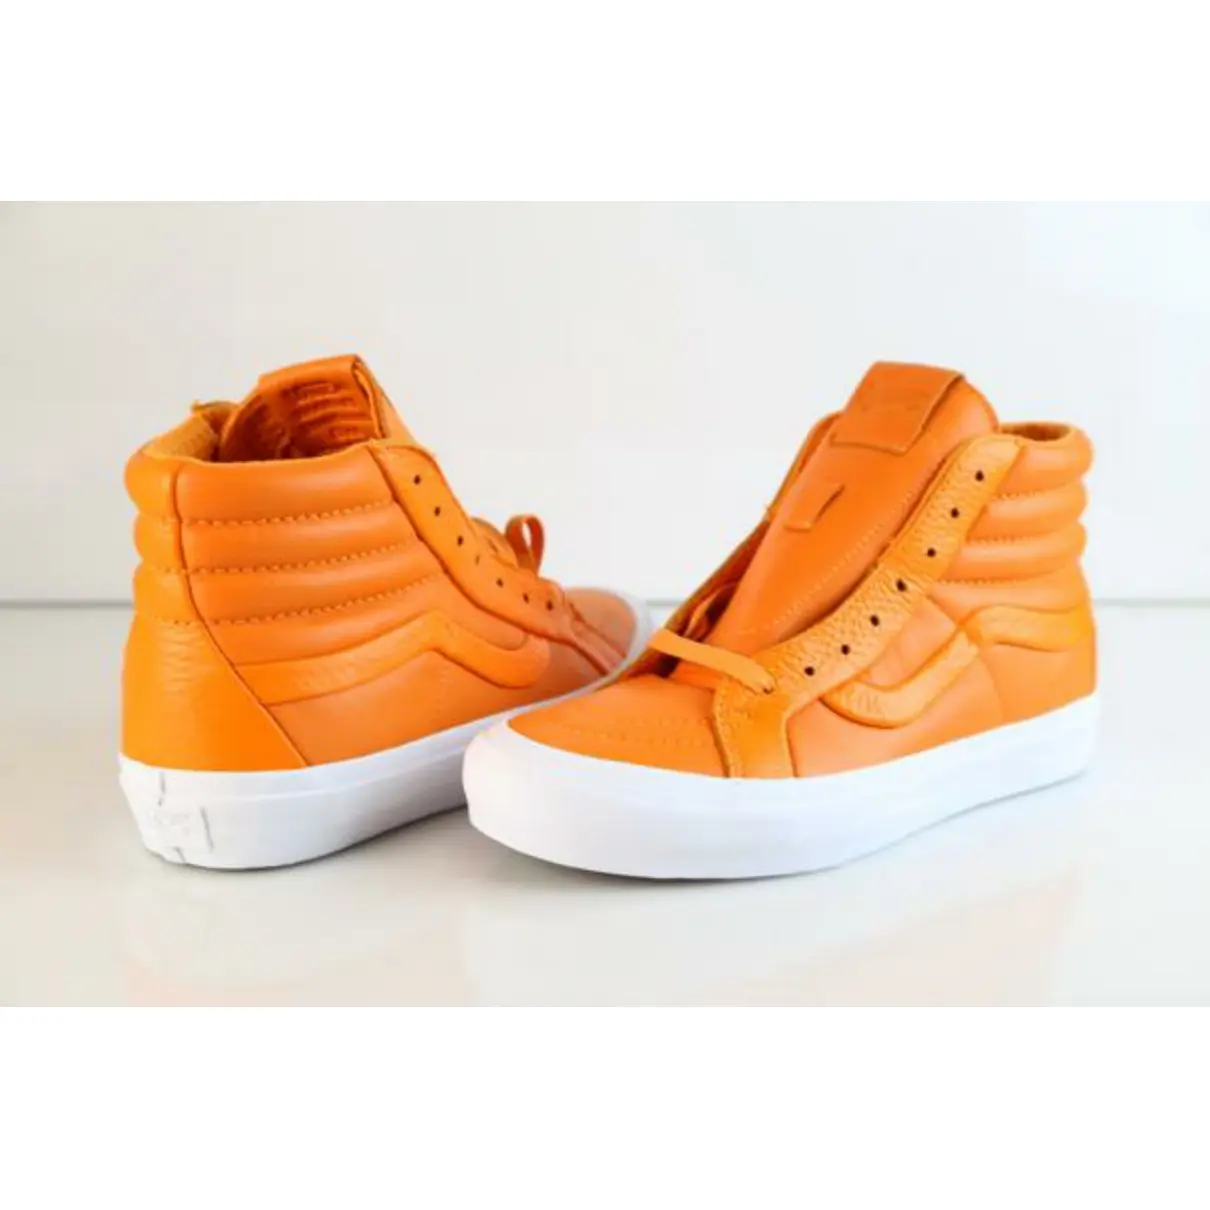 Buy Vans Leather high trainers online